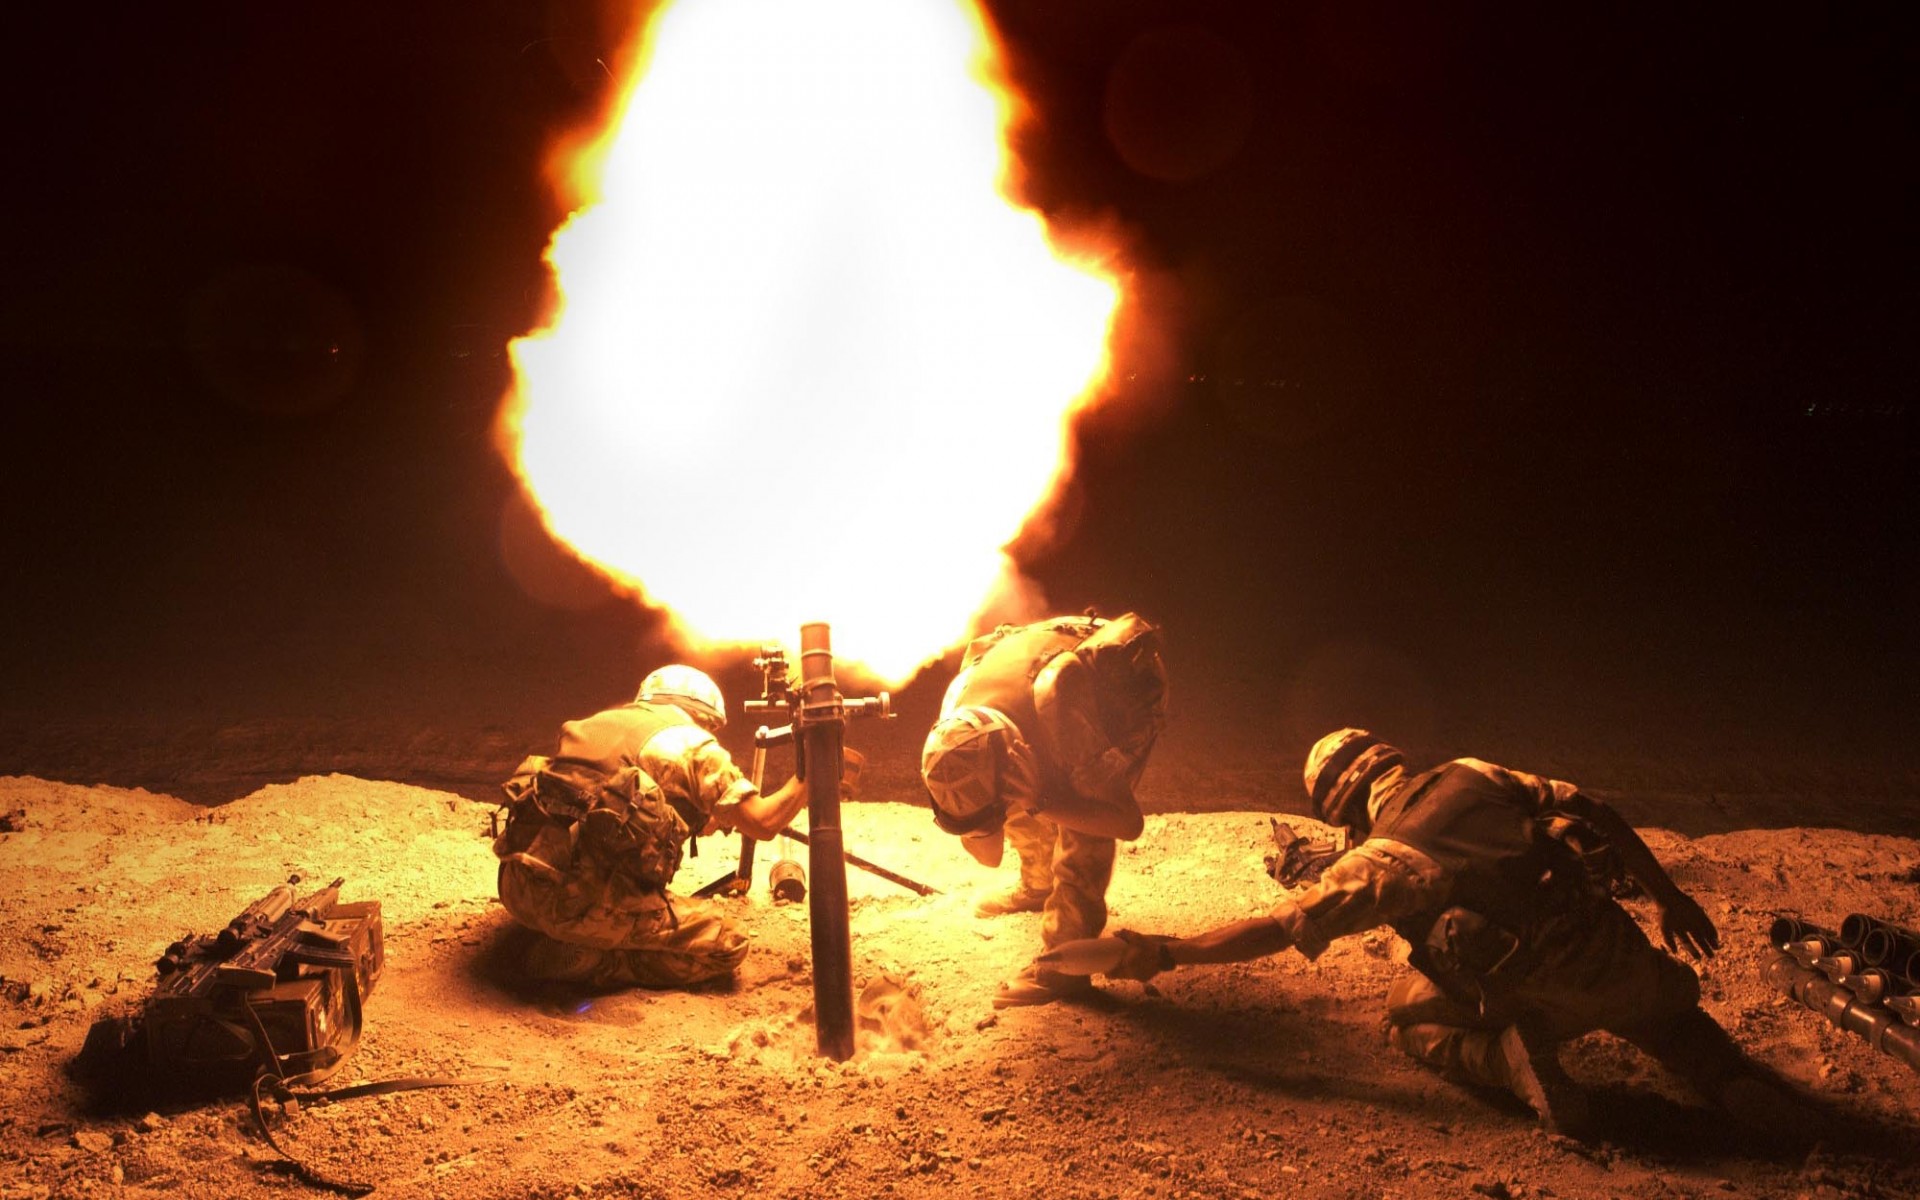 military, Soldiers, Weapons, Explosions, Fire, Flames, Night, Bright